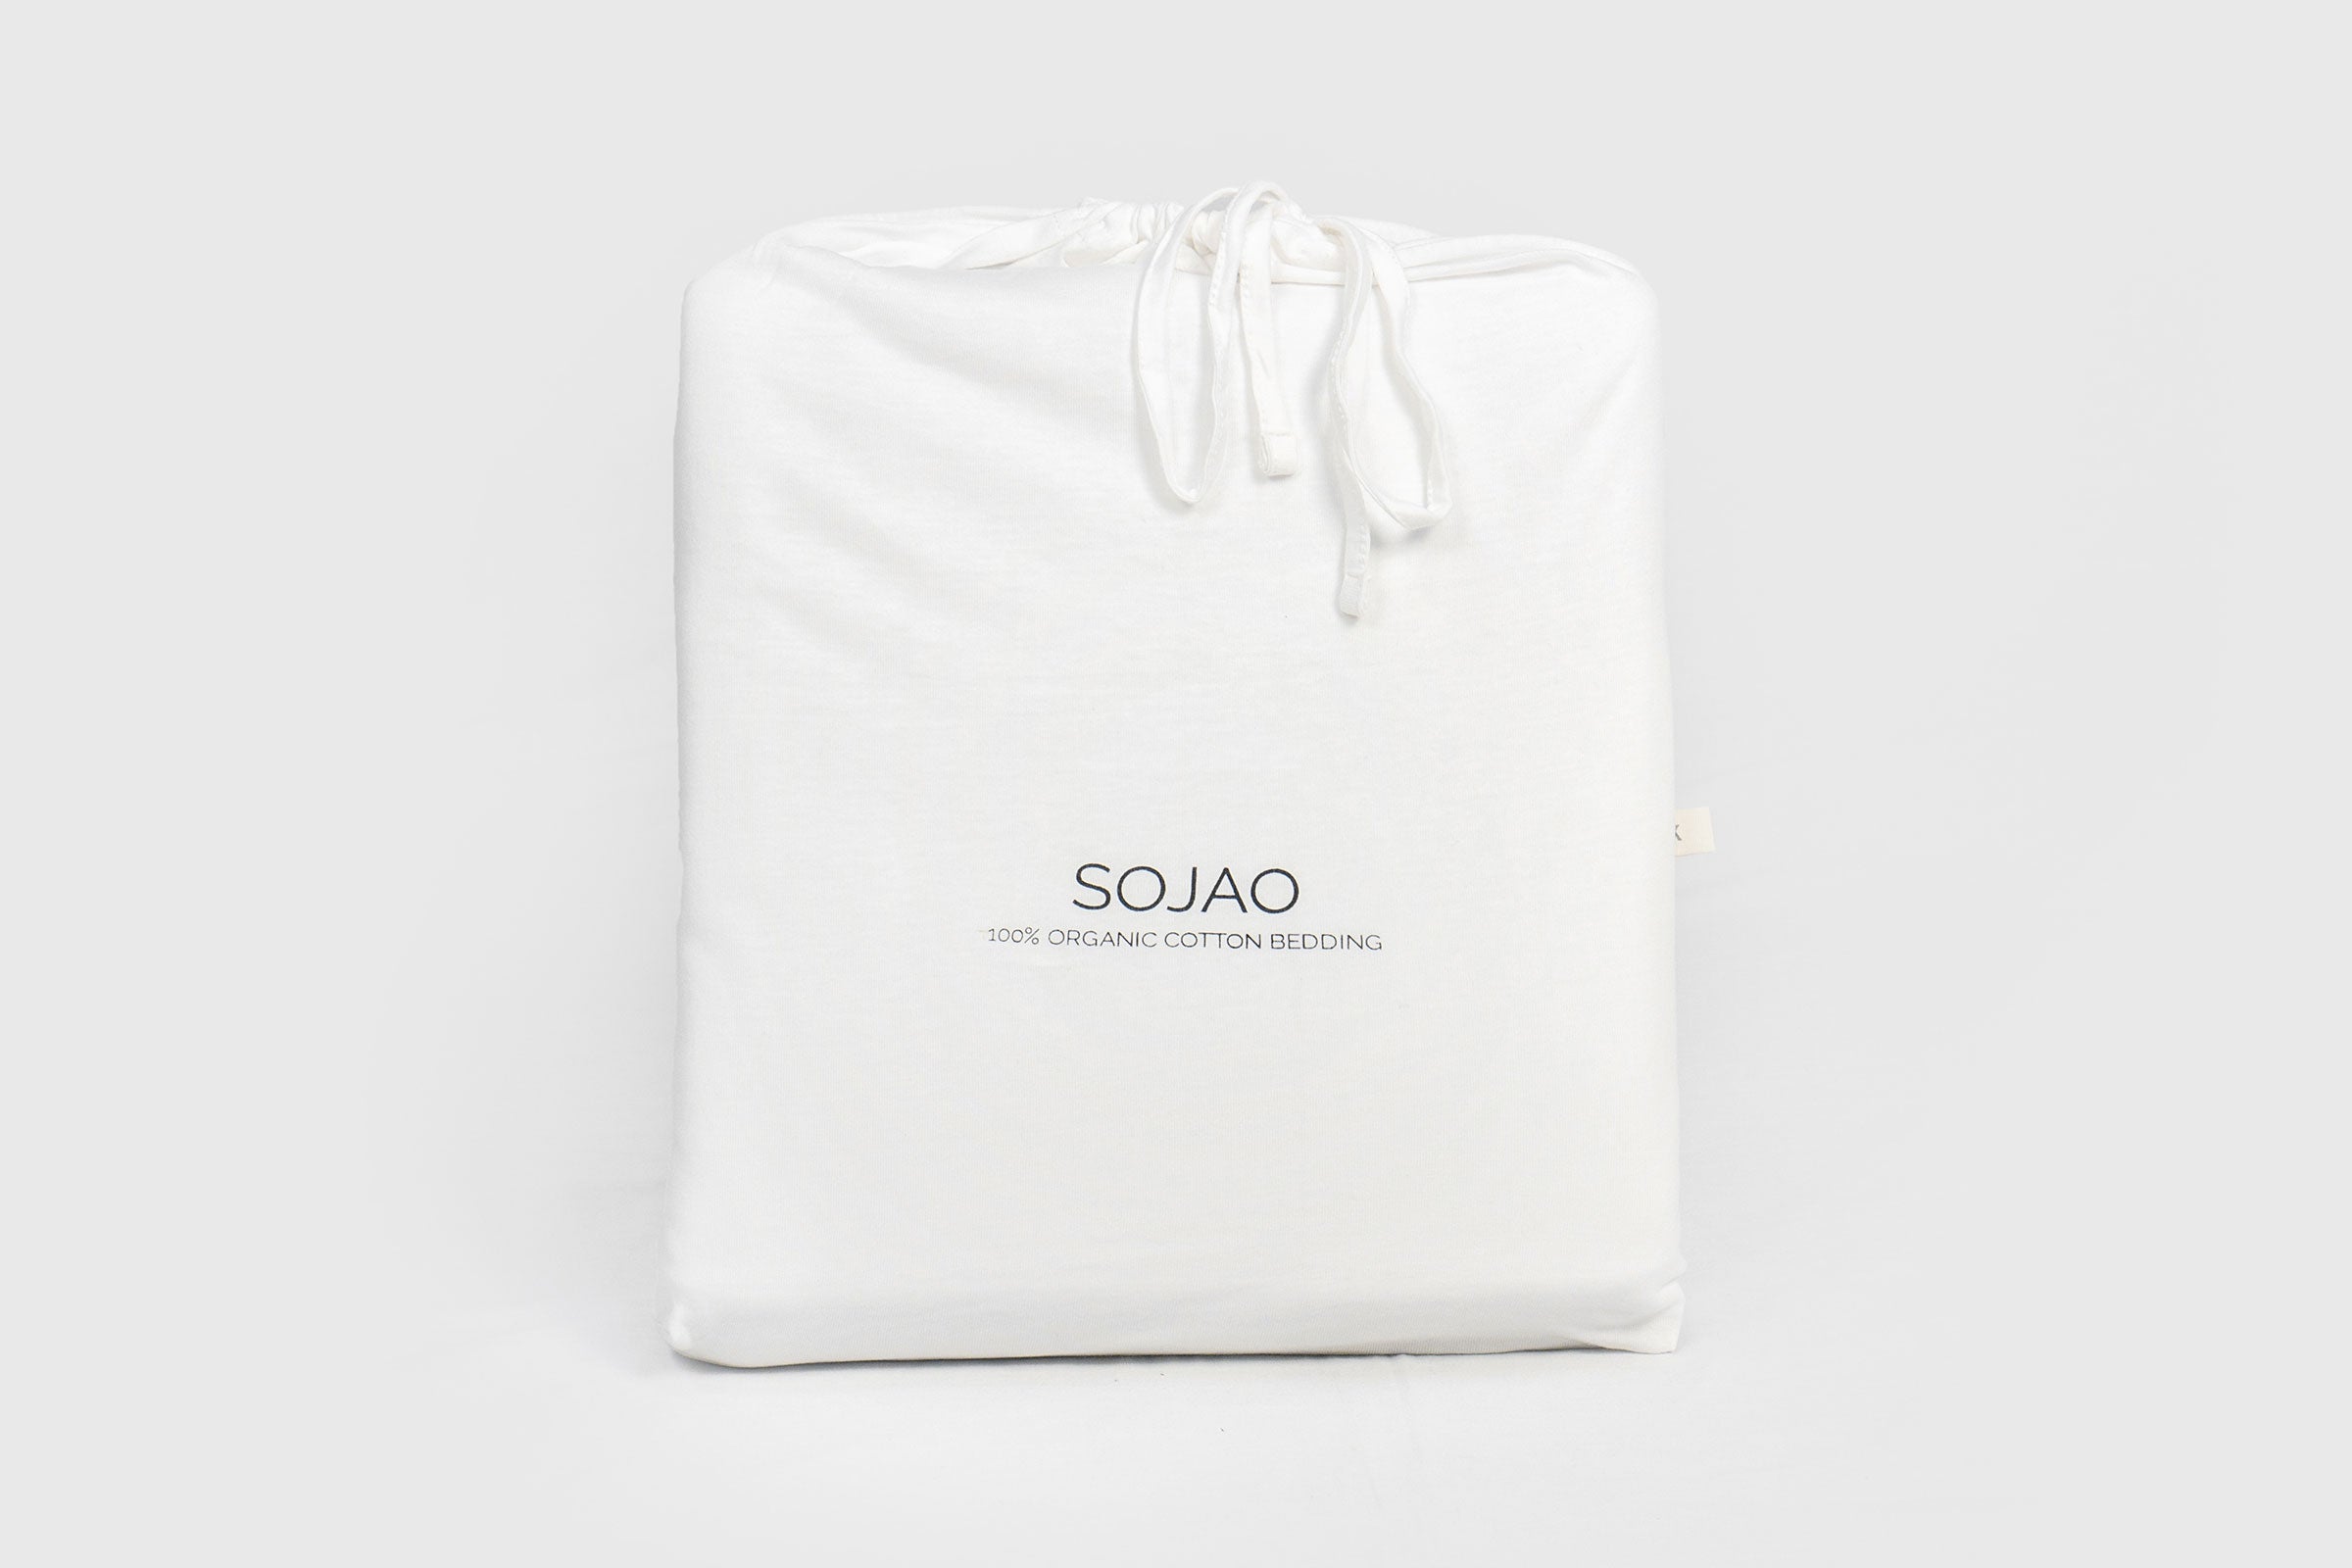 organic-jersey-white-baby-cot-fitted-sheet-dust-bag-by-sojao.jpg